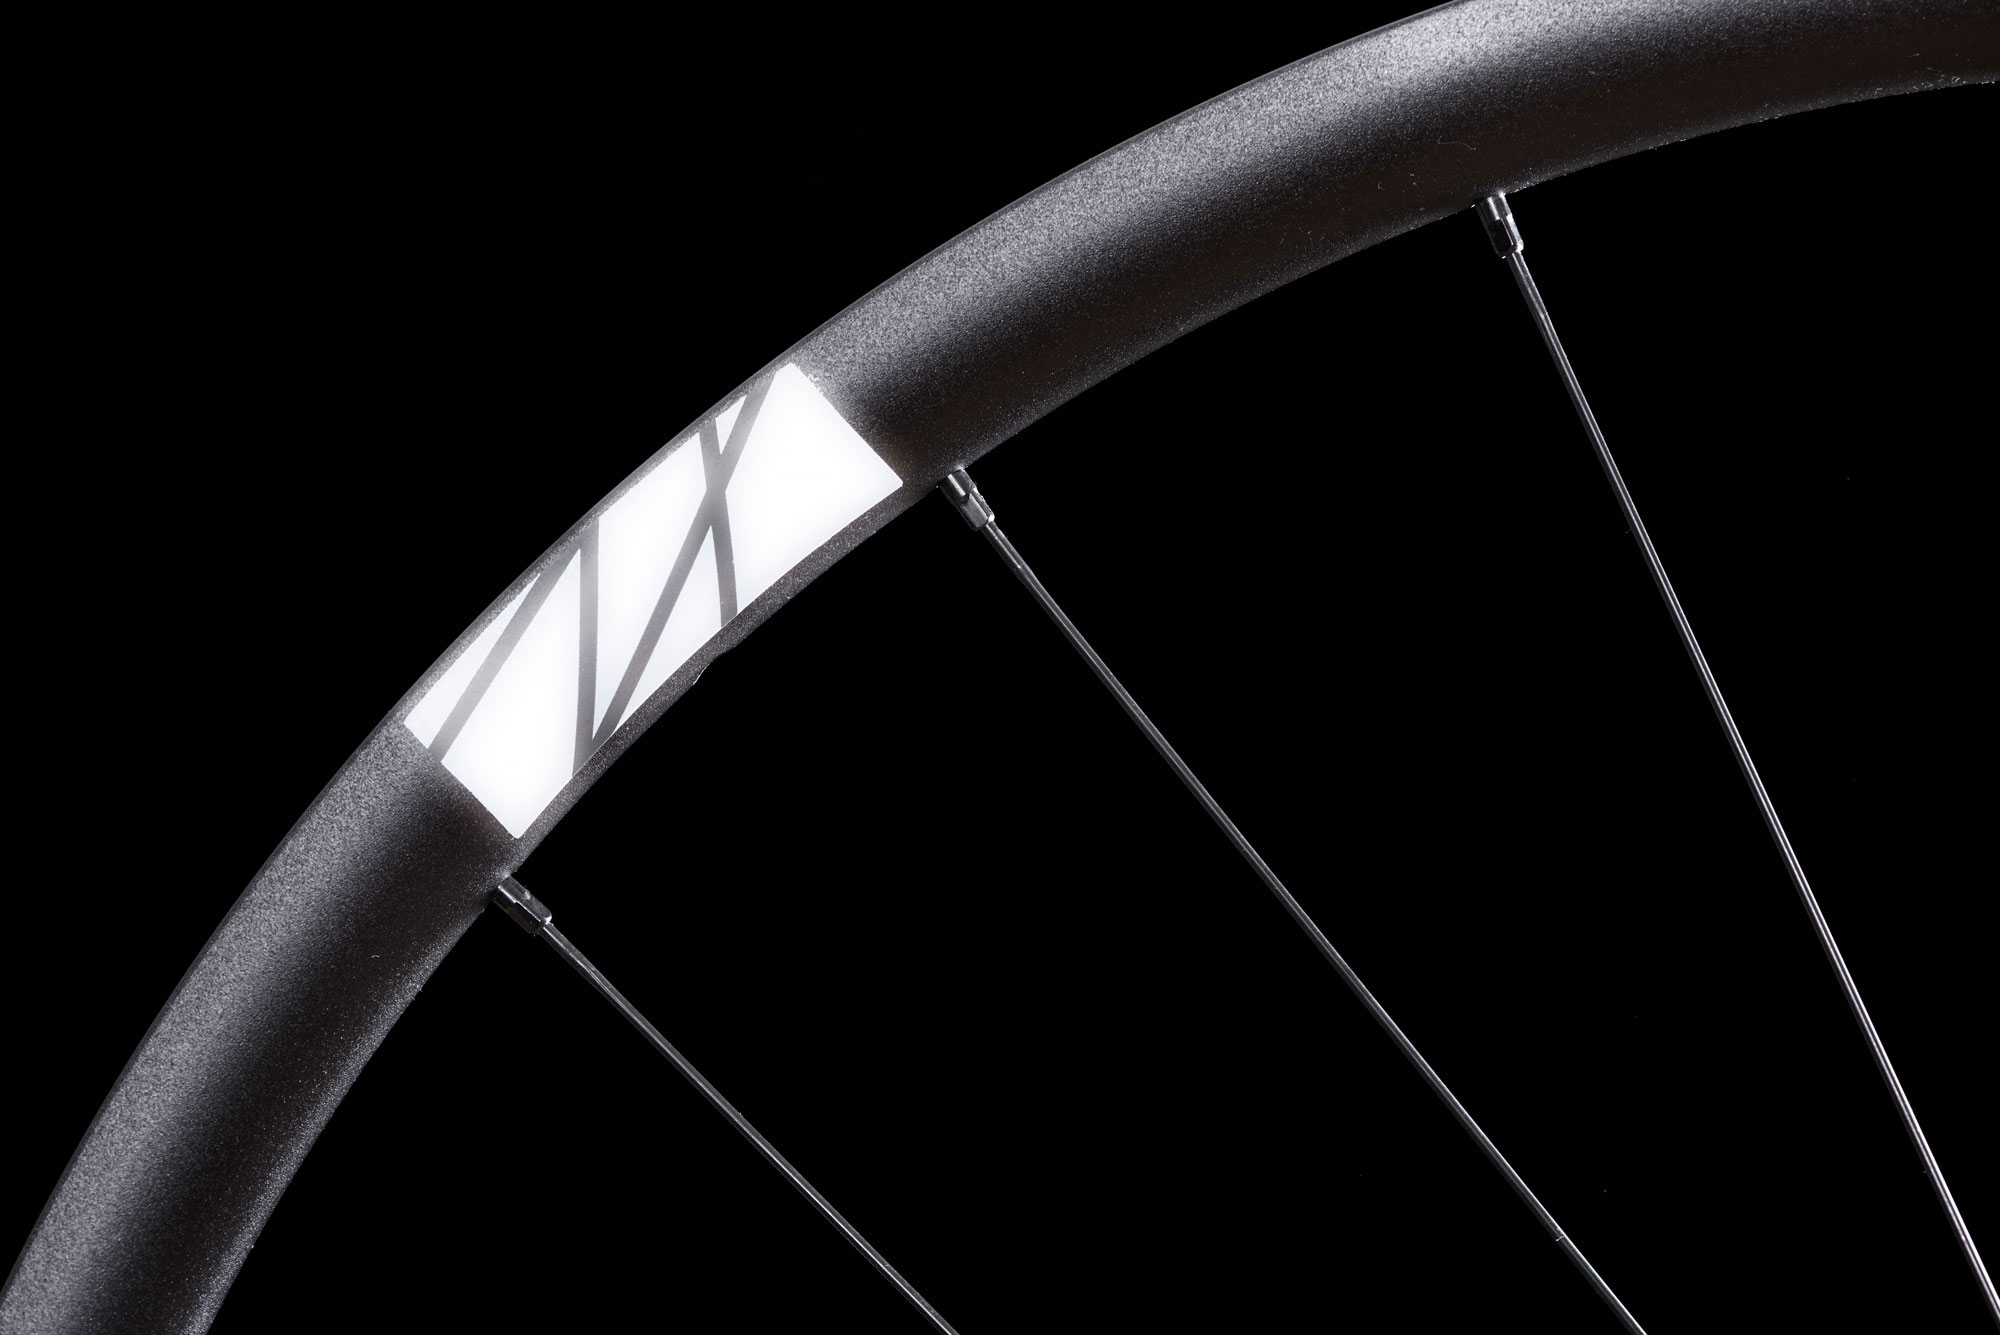 The robust aluminium rim is 26 mm wide (22 mm inside) and 24. 5 mm high. The reflective sticker is designed to ensure good visibility in traffic.